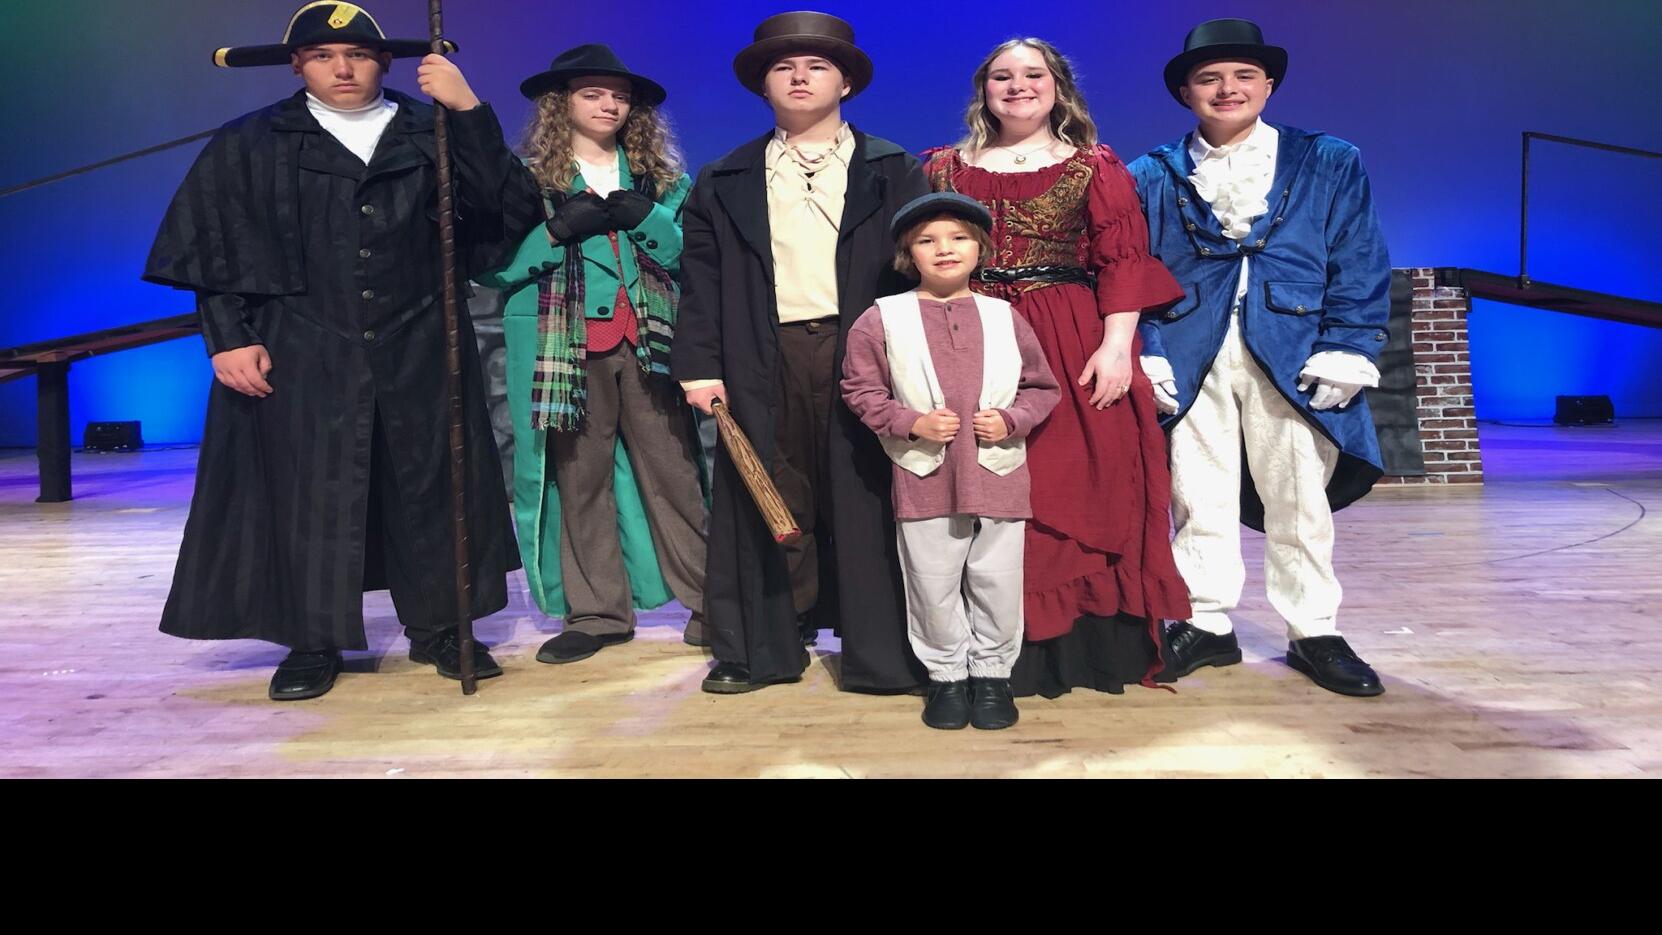 NDHS Drama Club presents Oliver Twist — The Grand Opera House of the South